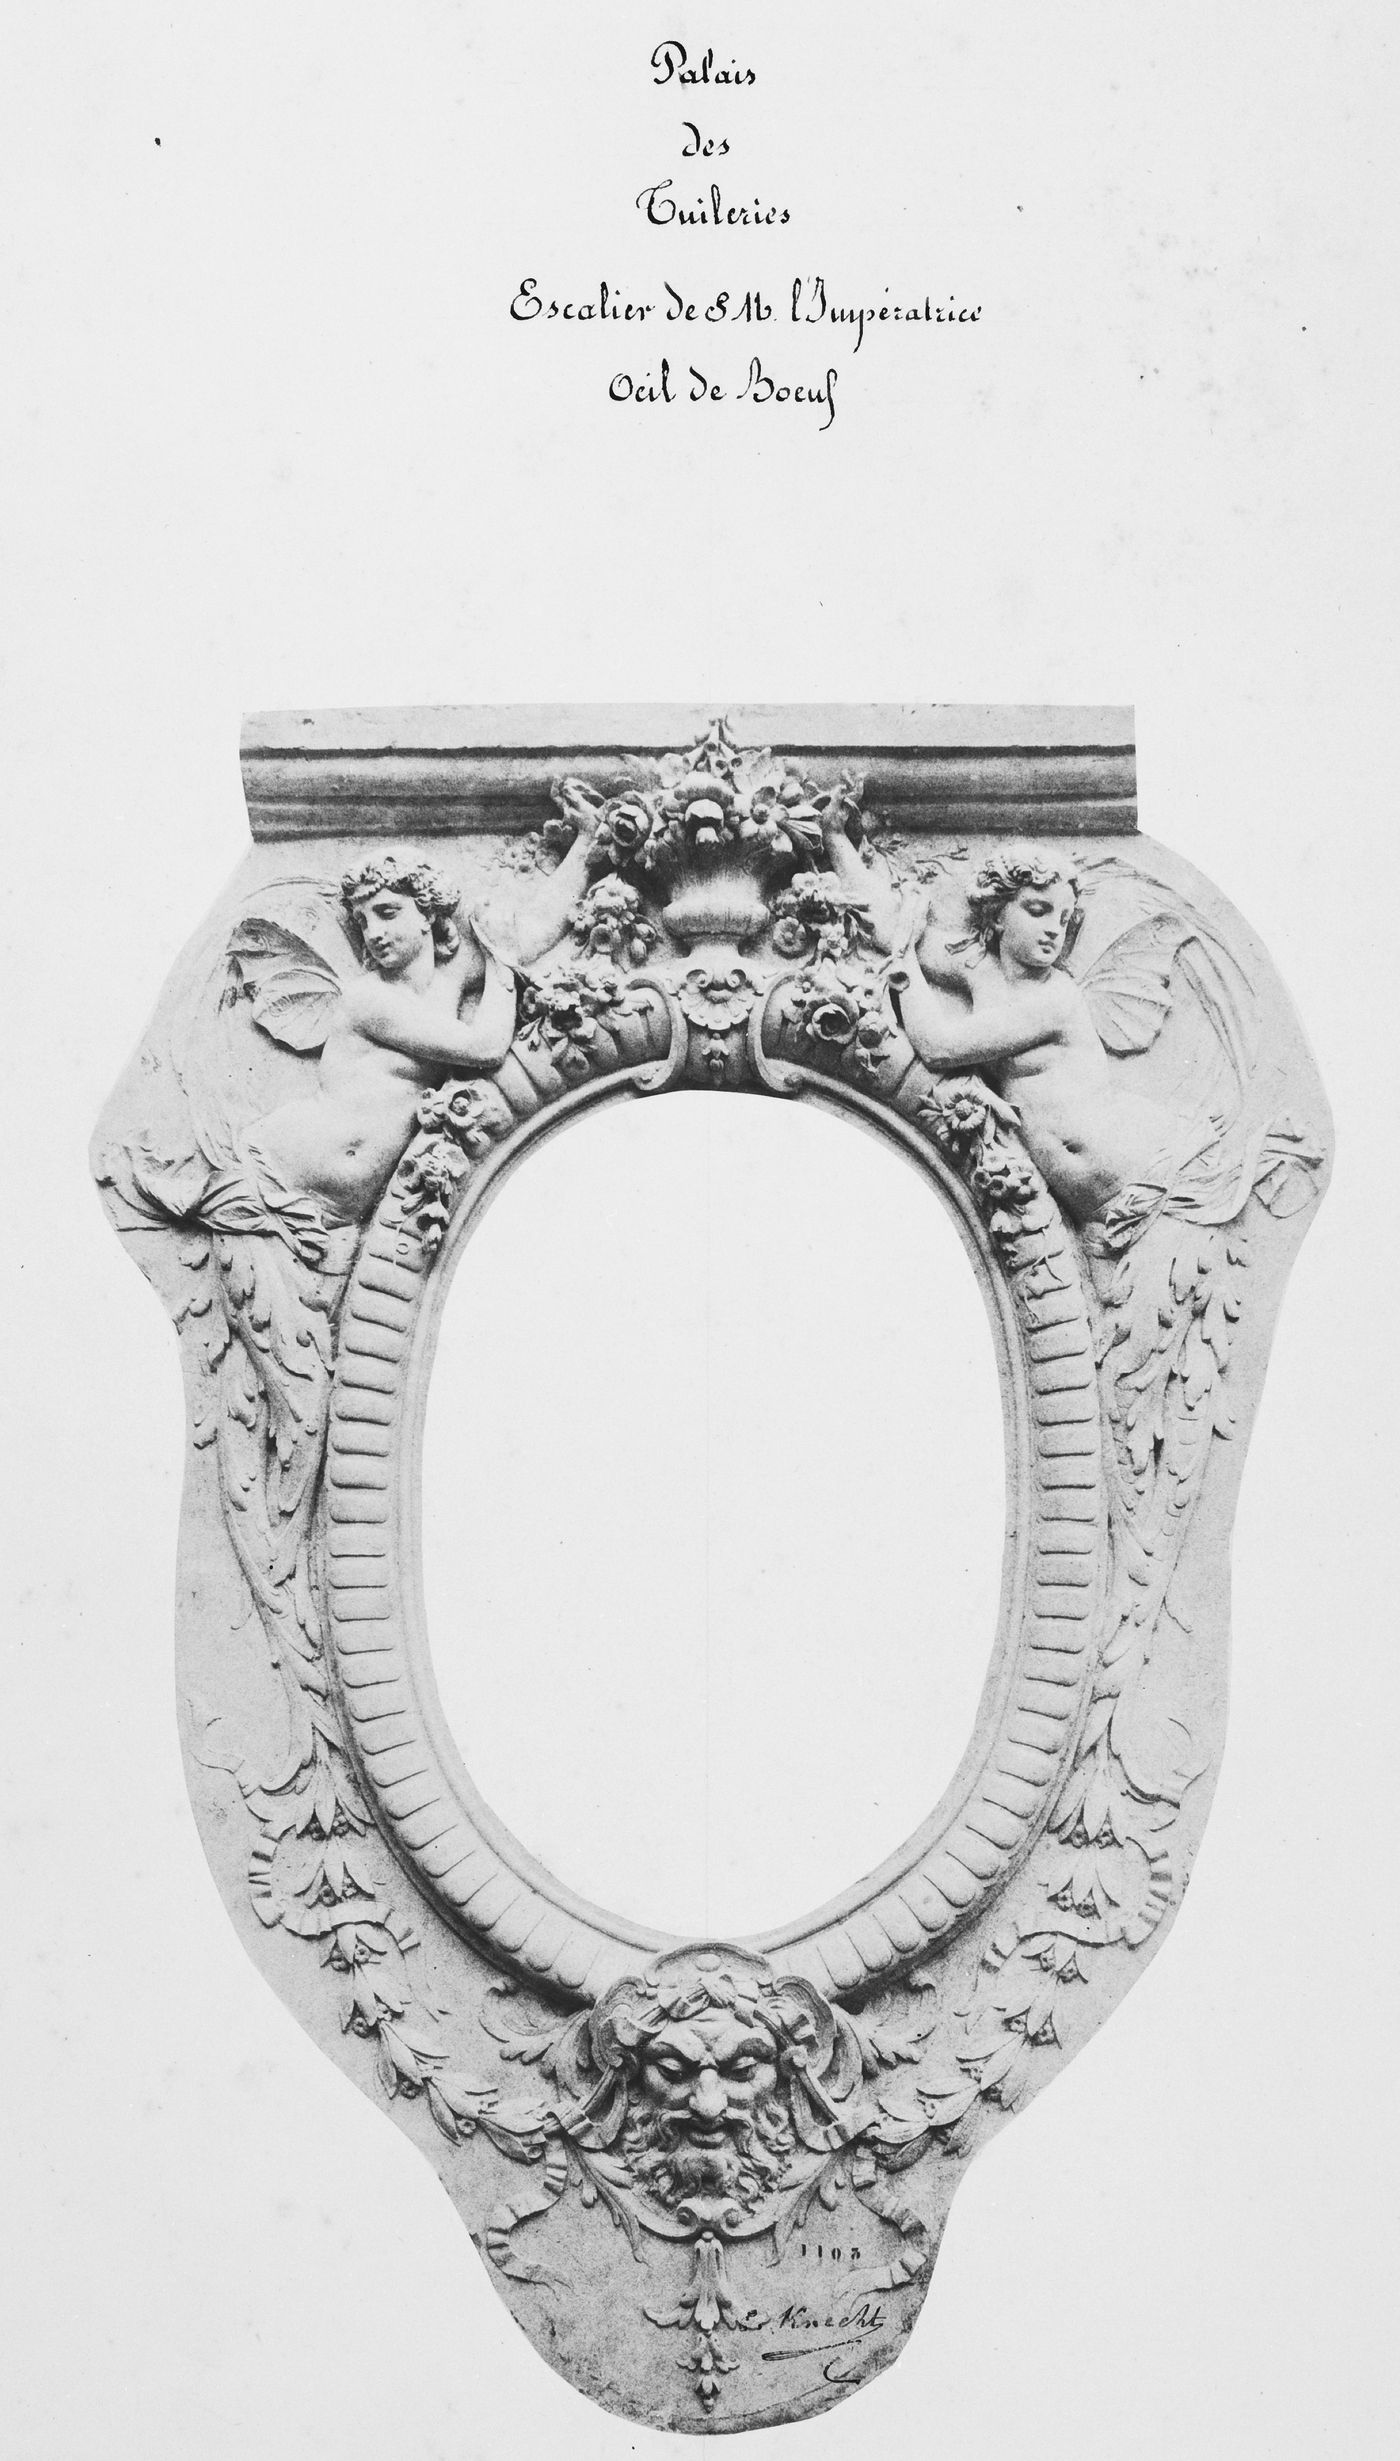 Sculptural model of cast by Emile Knecht for an ox-eye window at the Palais des Tuileries, Paris, France